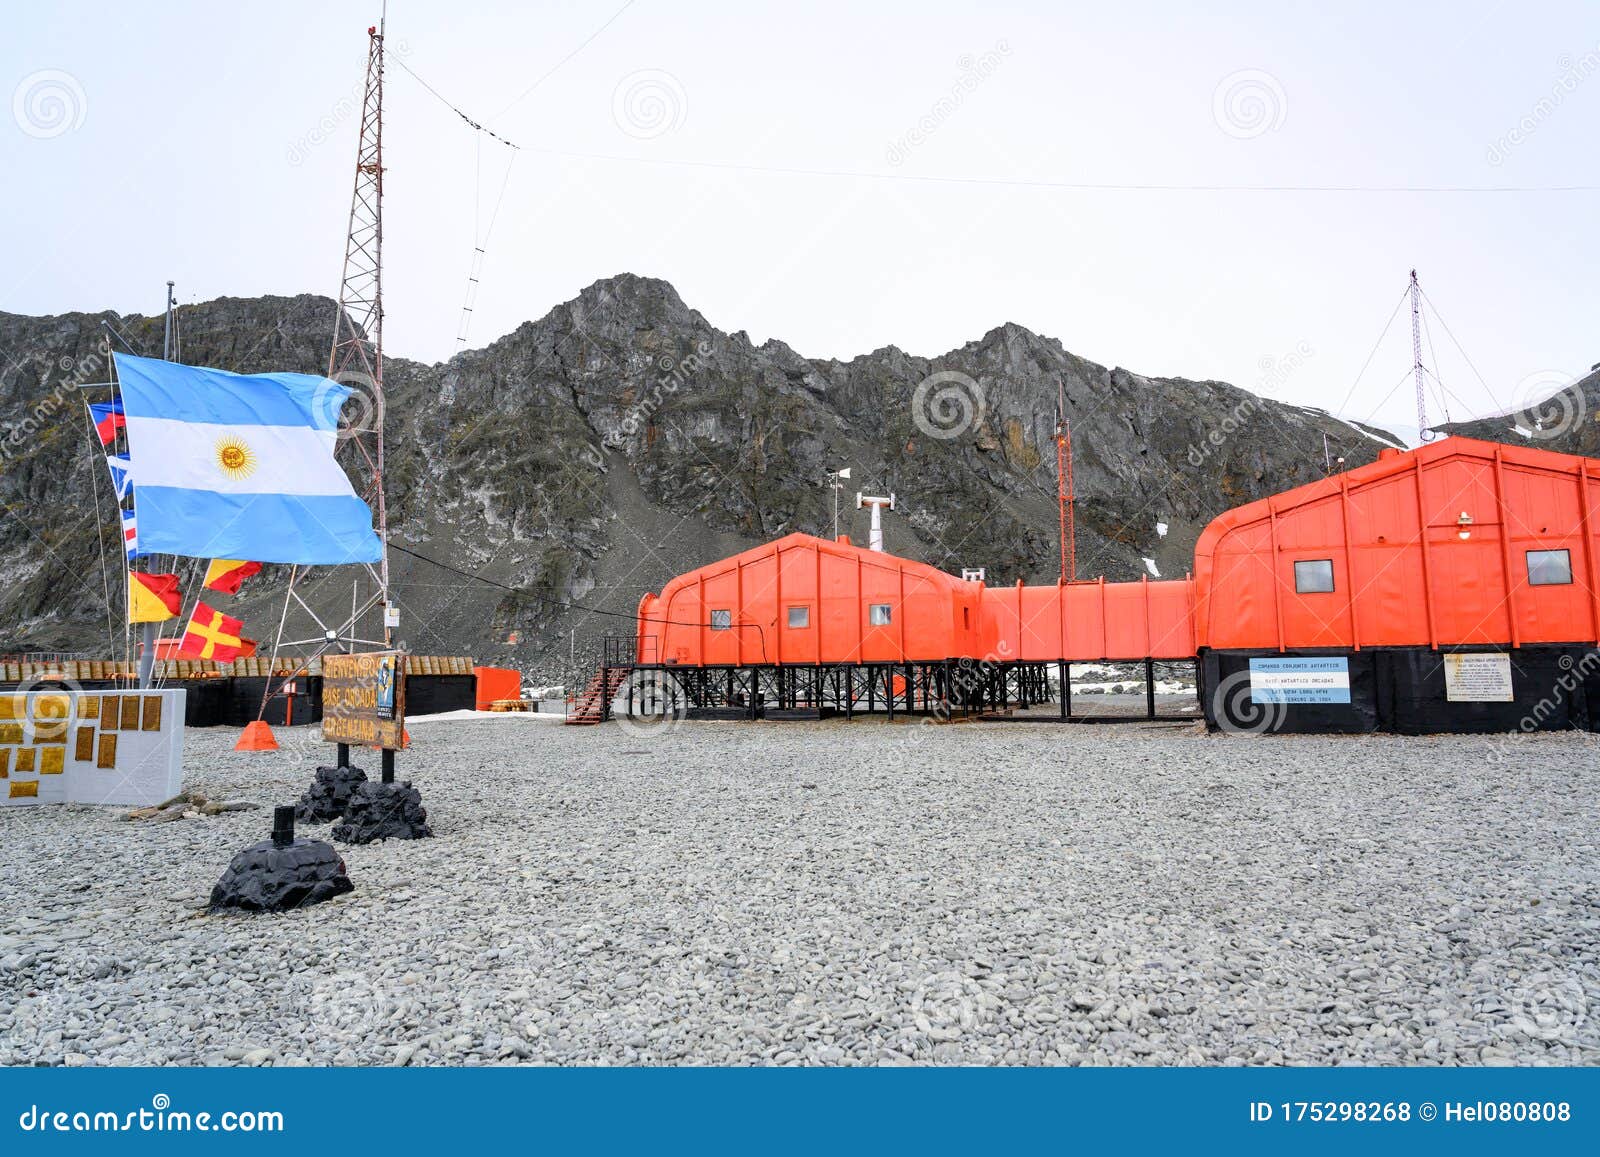 argentine antarctic research station, base naval orcadas, laurie island, one of the south orkney islands